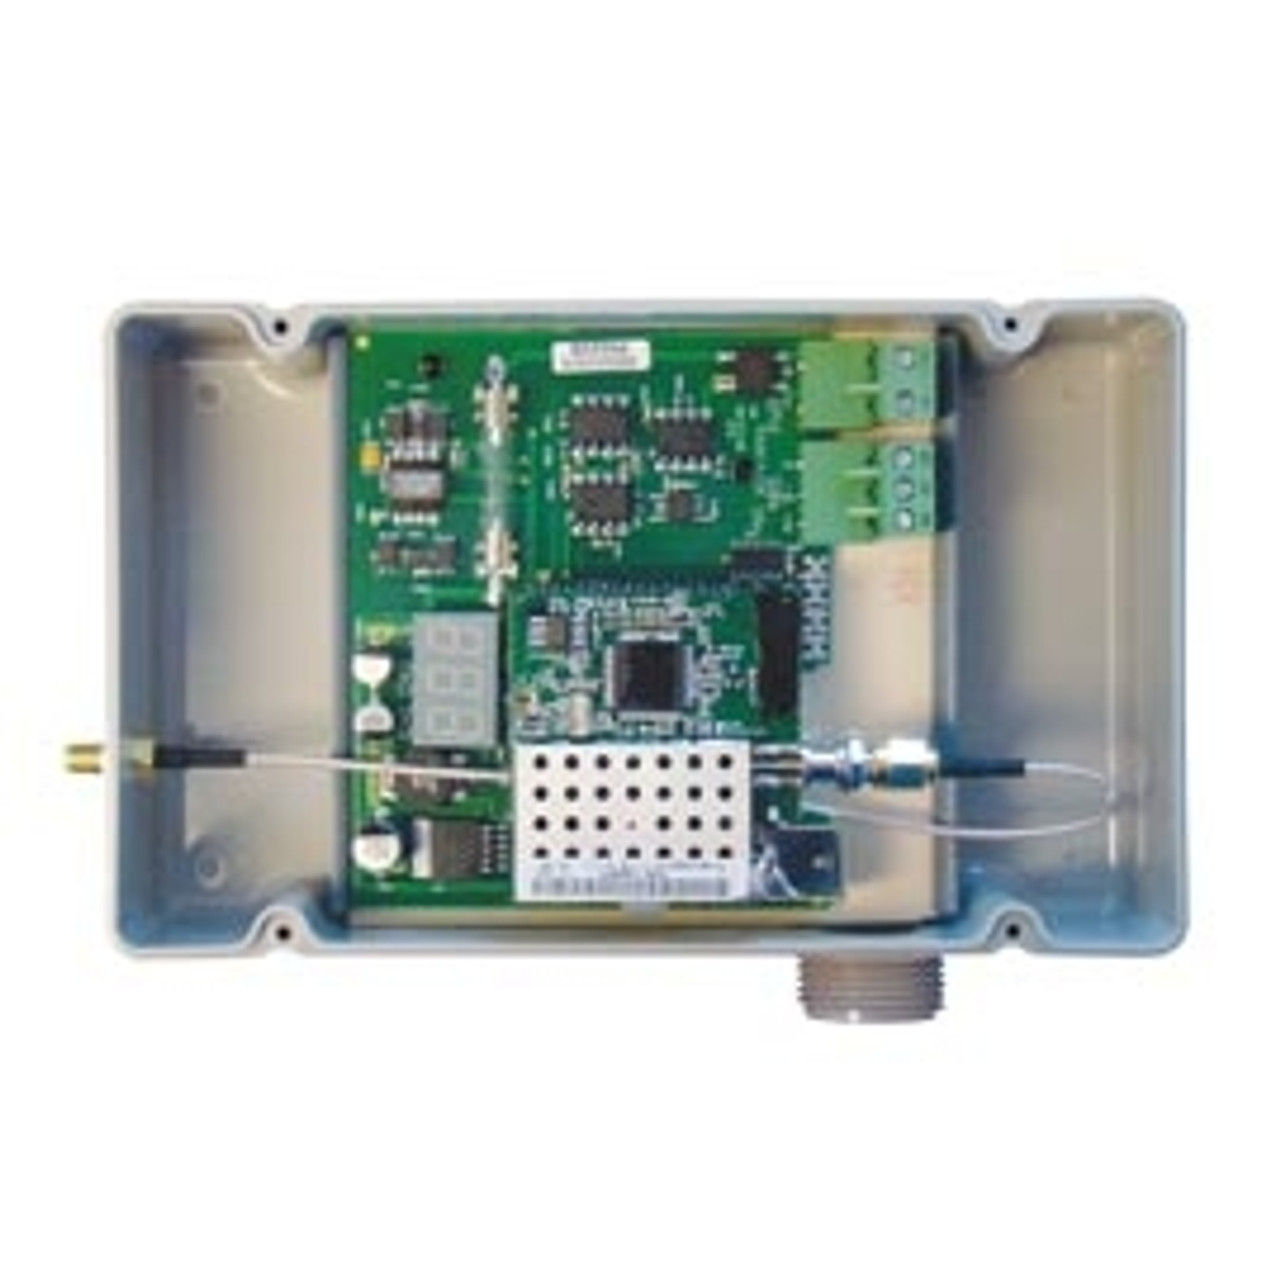 FUNCTIONAL DEVICES FUNRIBWP1BC AIC BacNet Client, PE6000